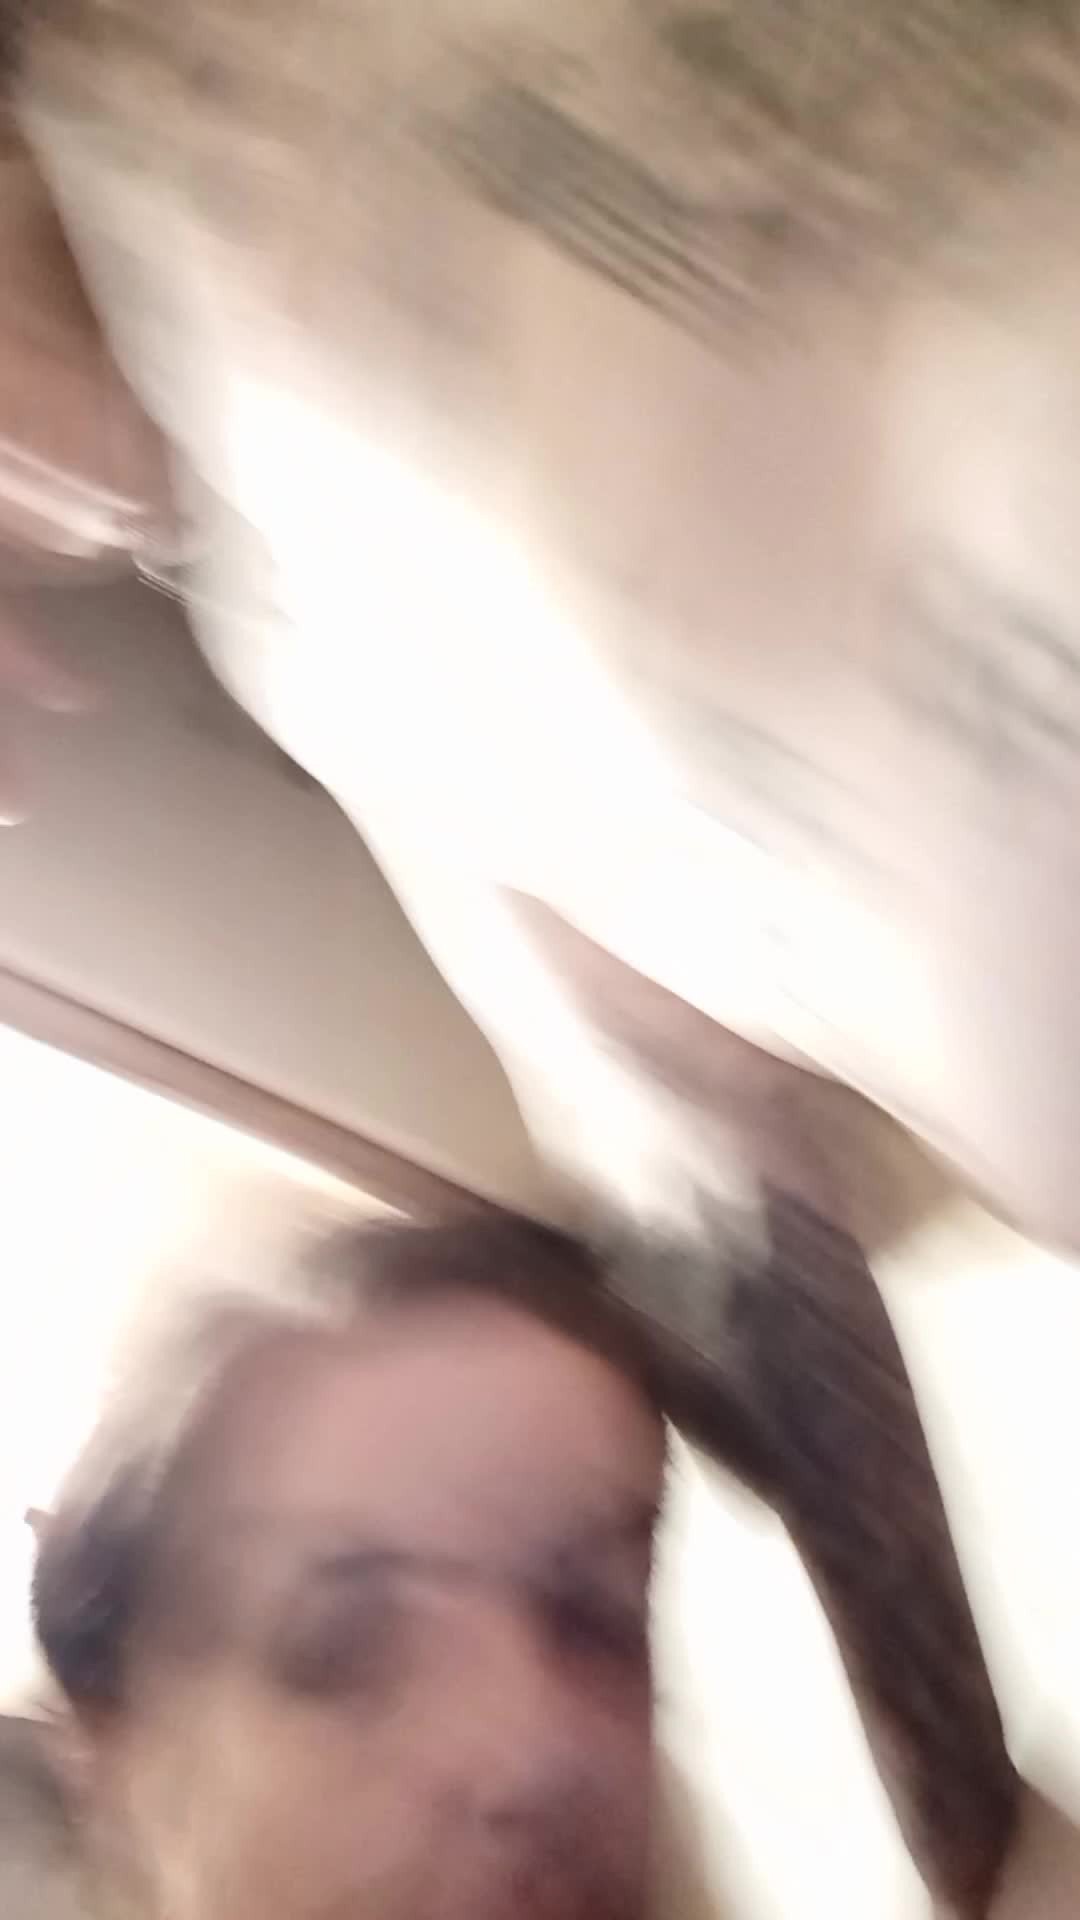 Video by Luv2blowclouds with the username @Luv2blowclouds, who is a verified user,  June 12, 2021 at 9:46 AM and the text says 'Absolutely fucking love this video 😁'